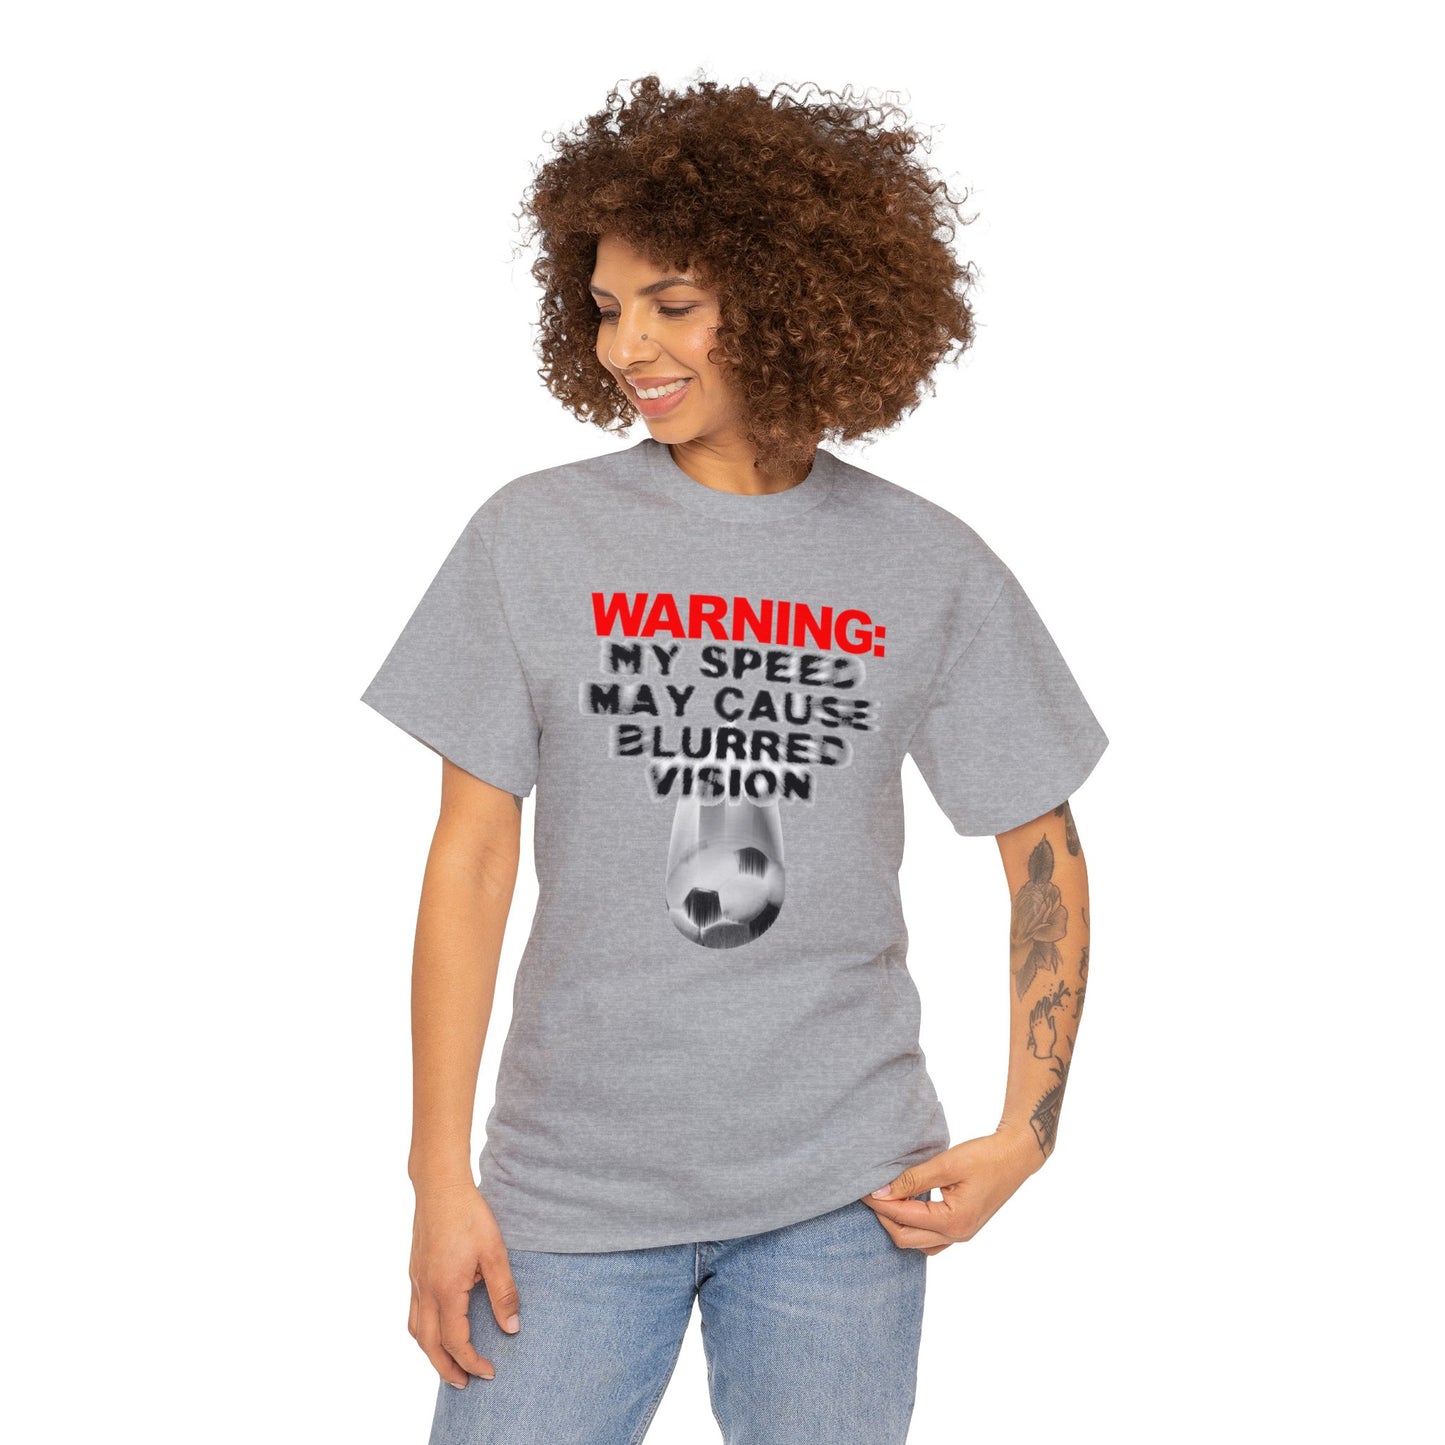 Warning My Speed May Cause Blurred Vision Soccer T-Shirt, Fast Soccer Player, Blurry Type, Soccer T-Shirt Design, Soccer Gift,